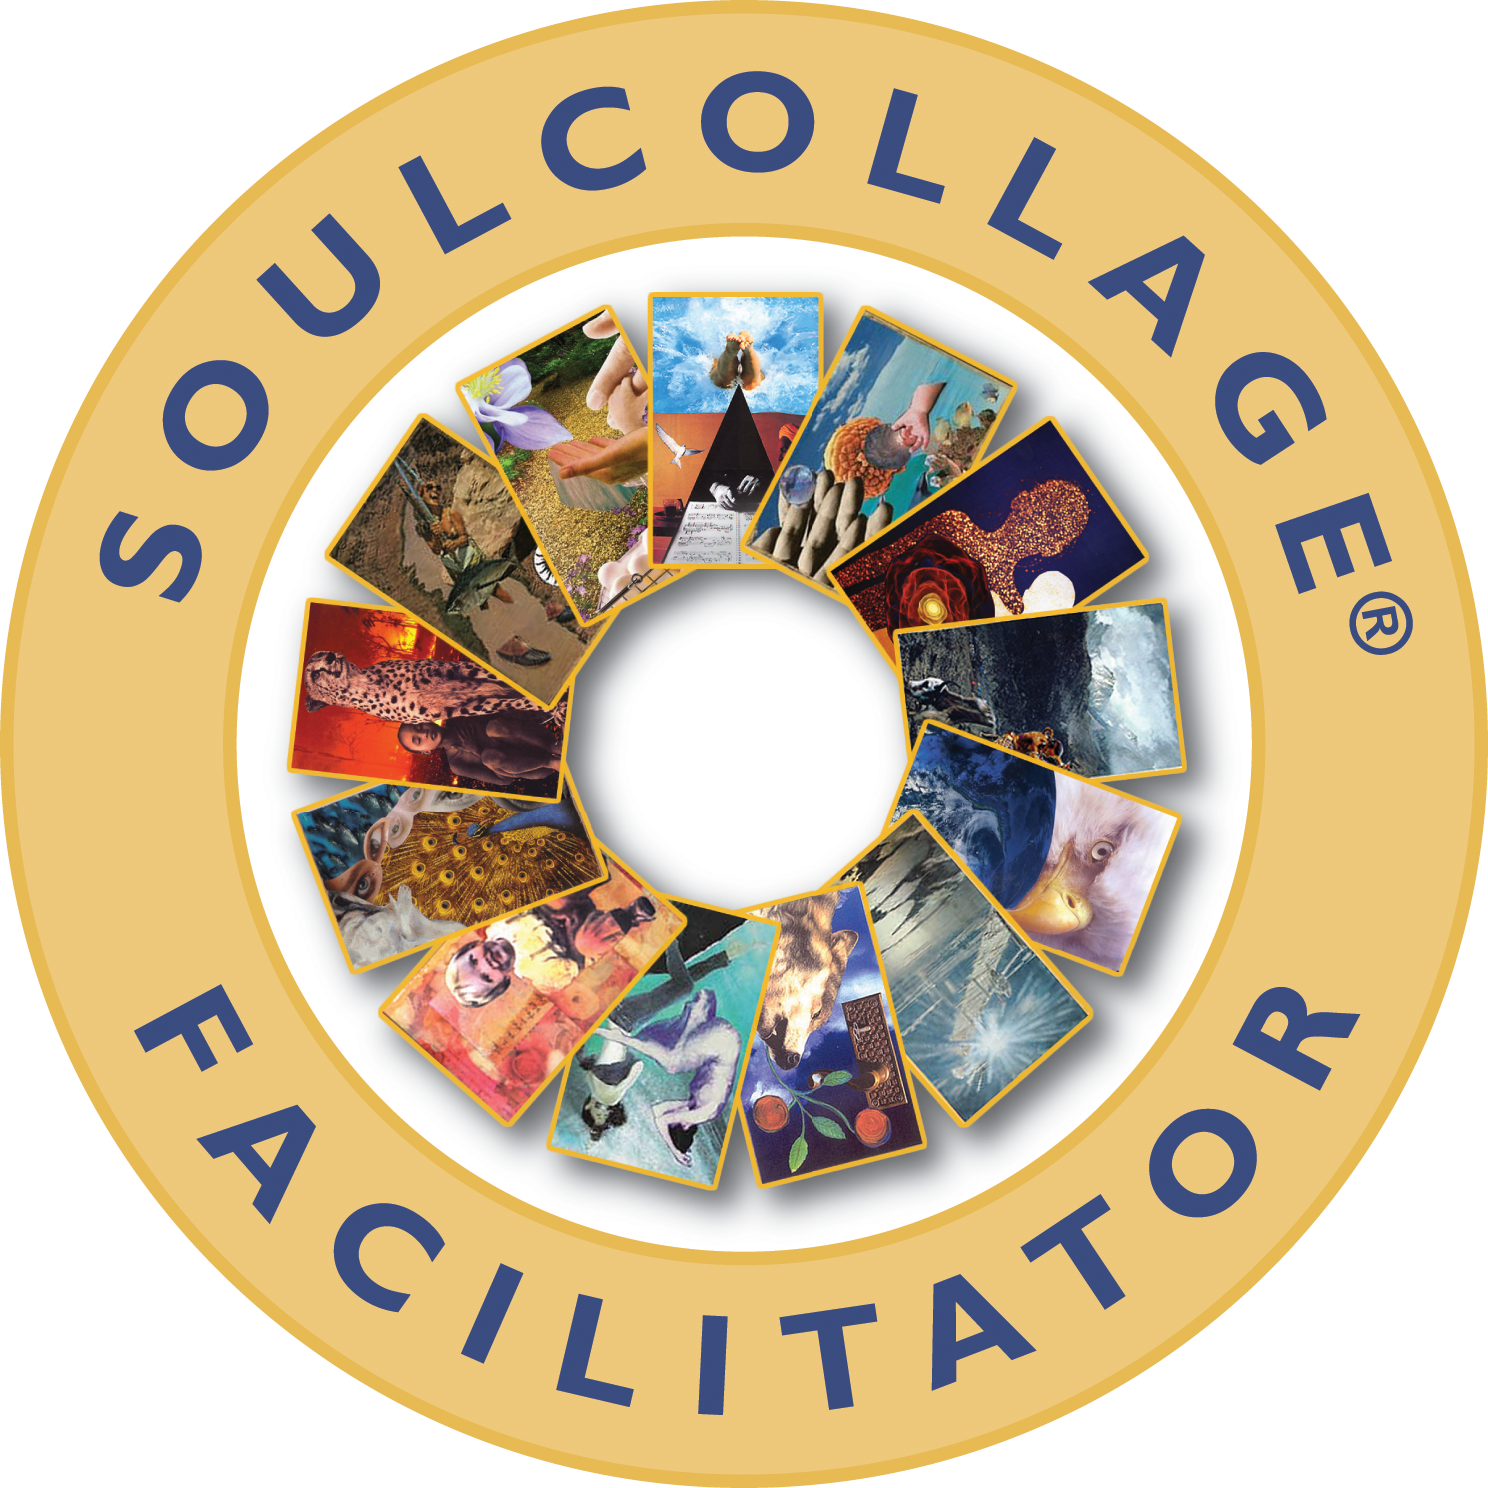 SoulCollage coming to UUFR!